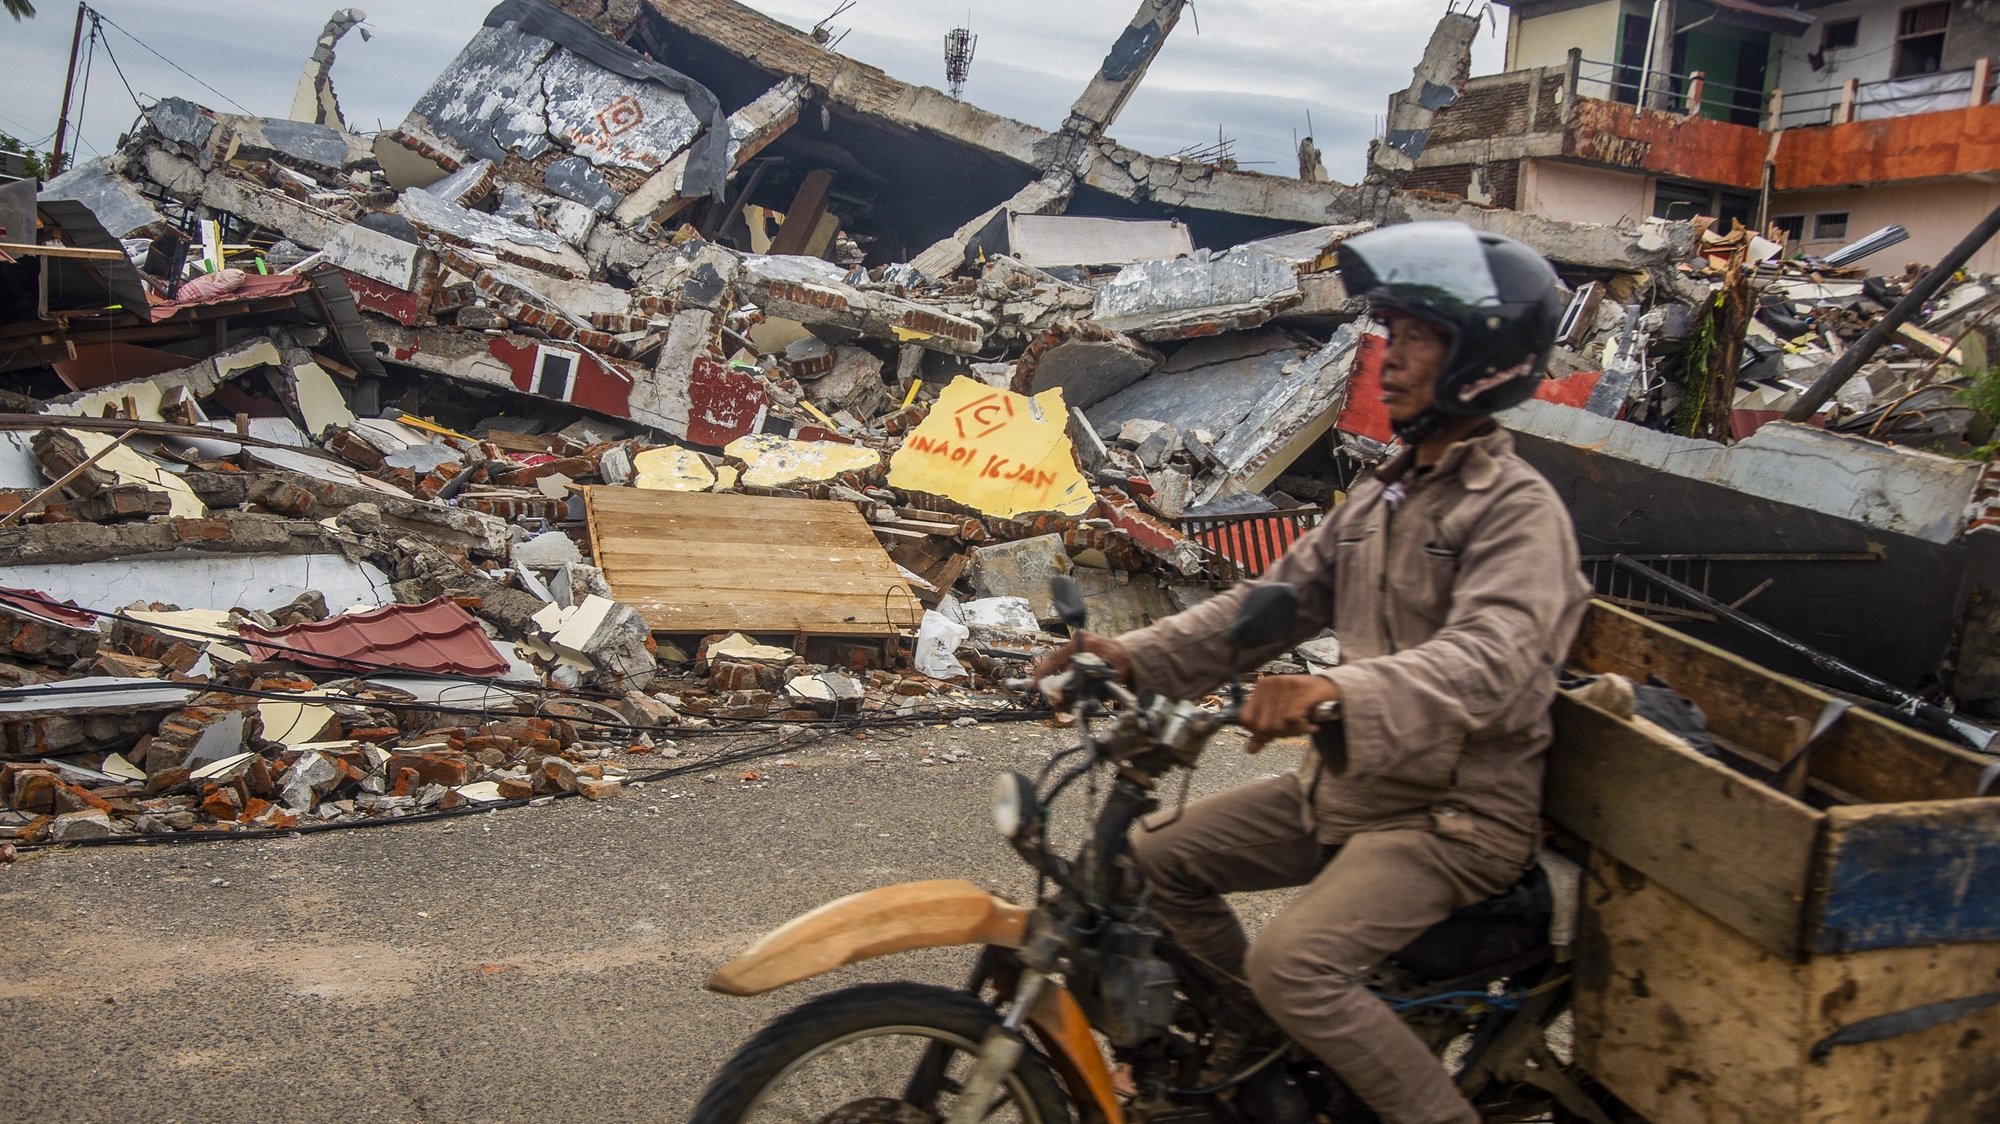 epa08942953 A man rides his motorbike past collapsed houses in the aftermath of an earthquake in Mamuju, West Sulawesi, Indonesia, 17 January 2021. At least 56 people were killed and hundreds injured after a 6.2 magnitude earthquake struck Sulawesi island on 15 January.  EPA/IQBAL LUBIS